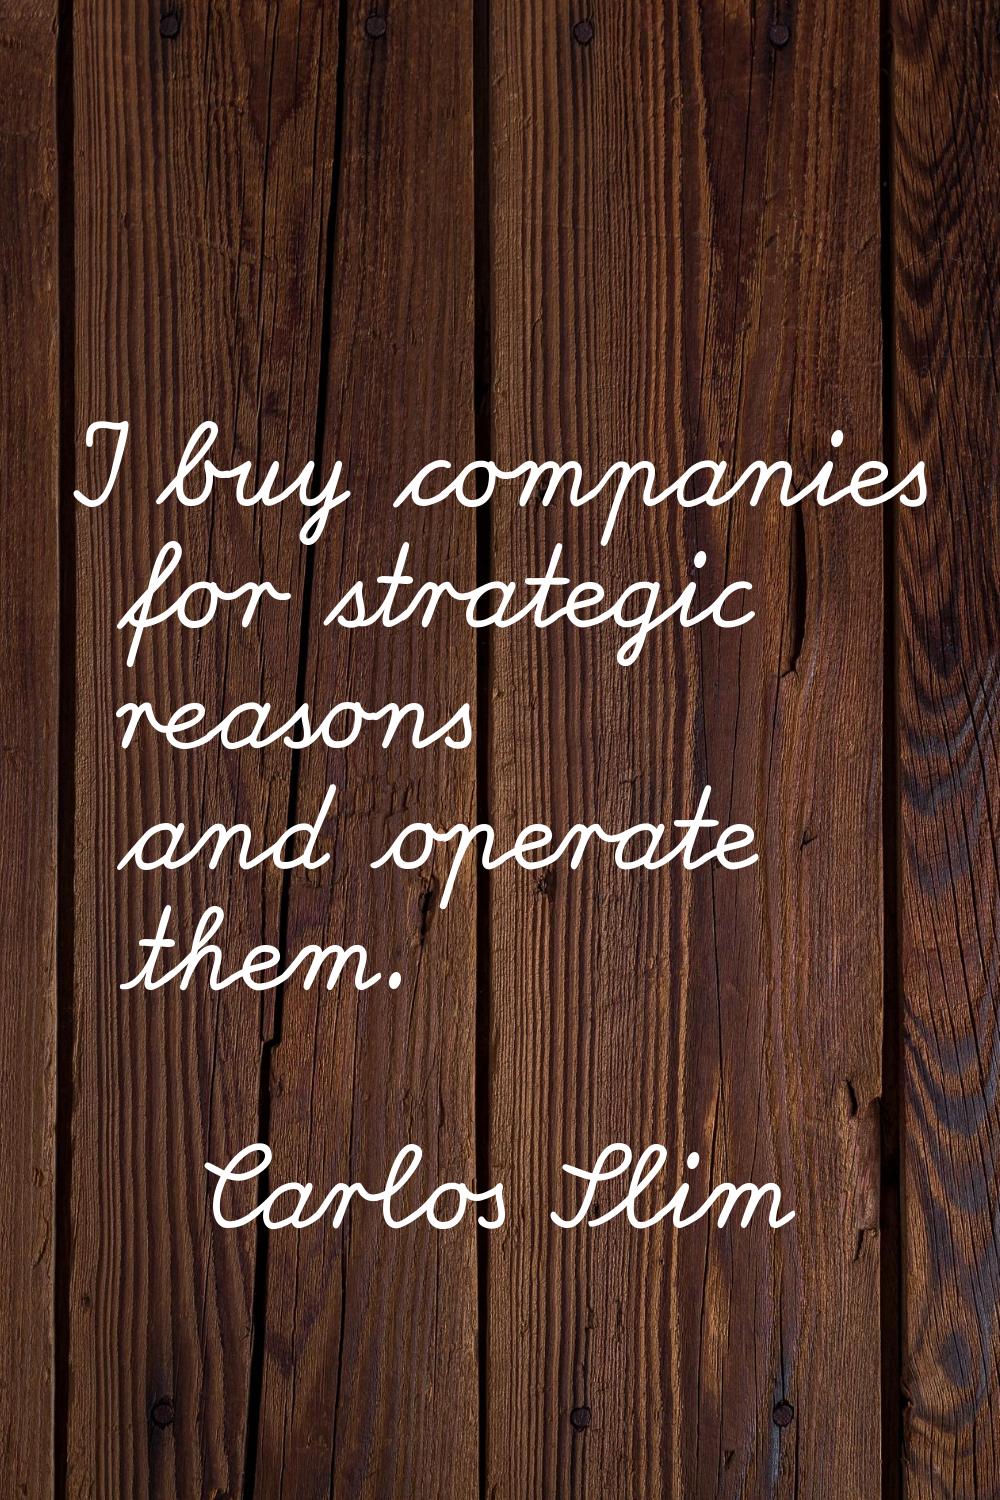 I buy companies for strategic reasons and operate them.